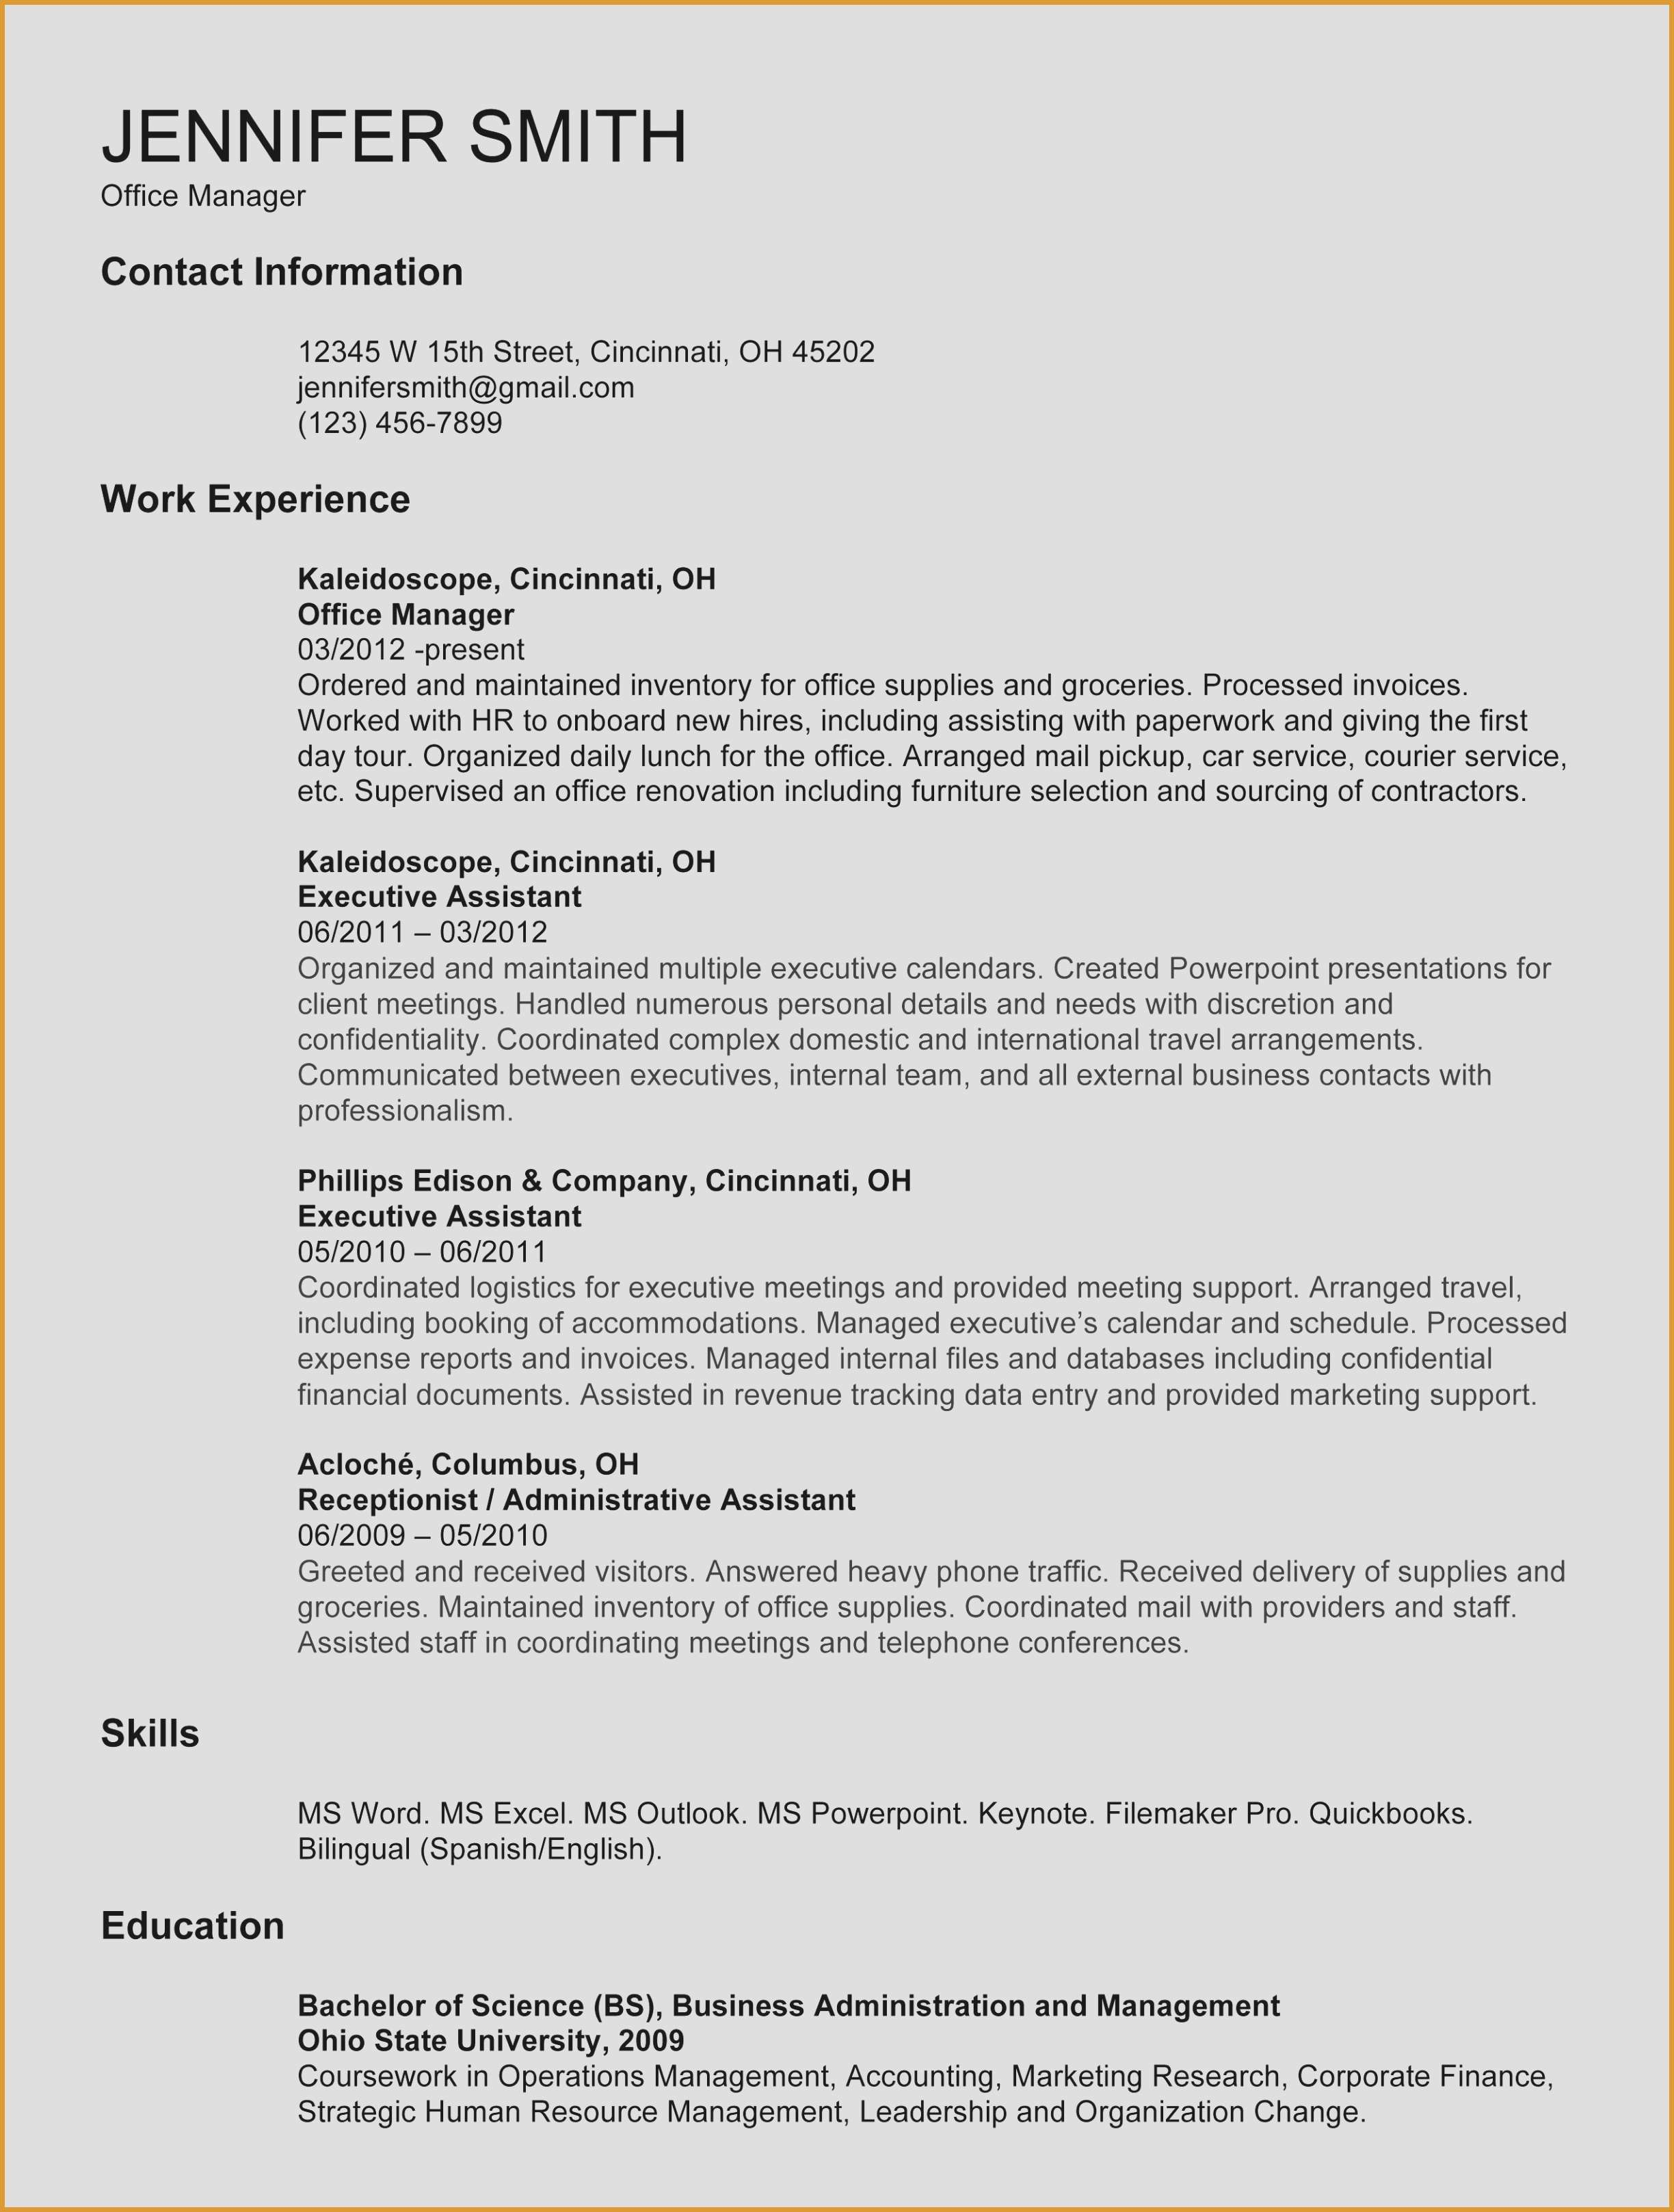 Letter Of Recommendation Template for Student - New Letter Re Mendation Template for Student